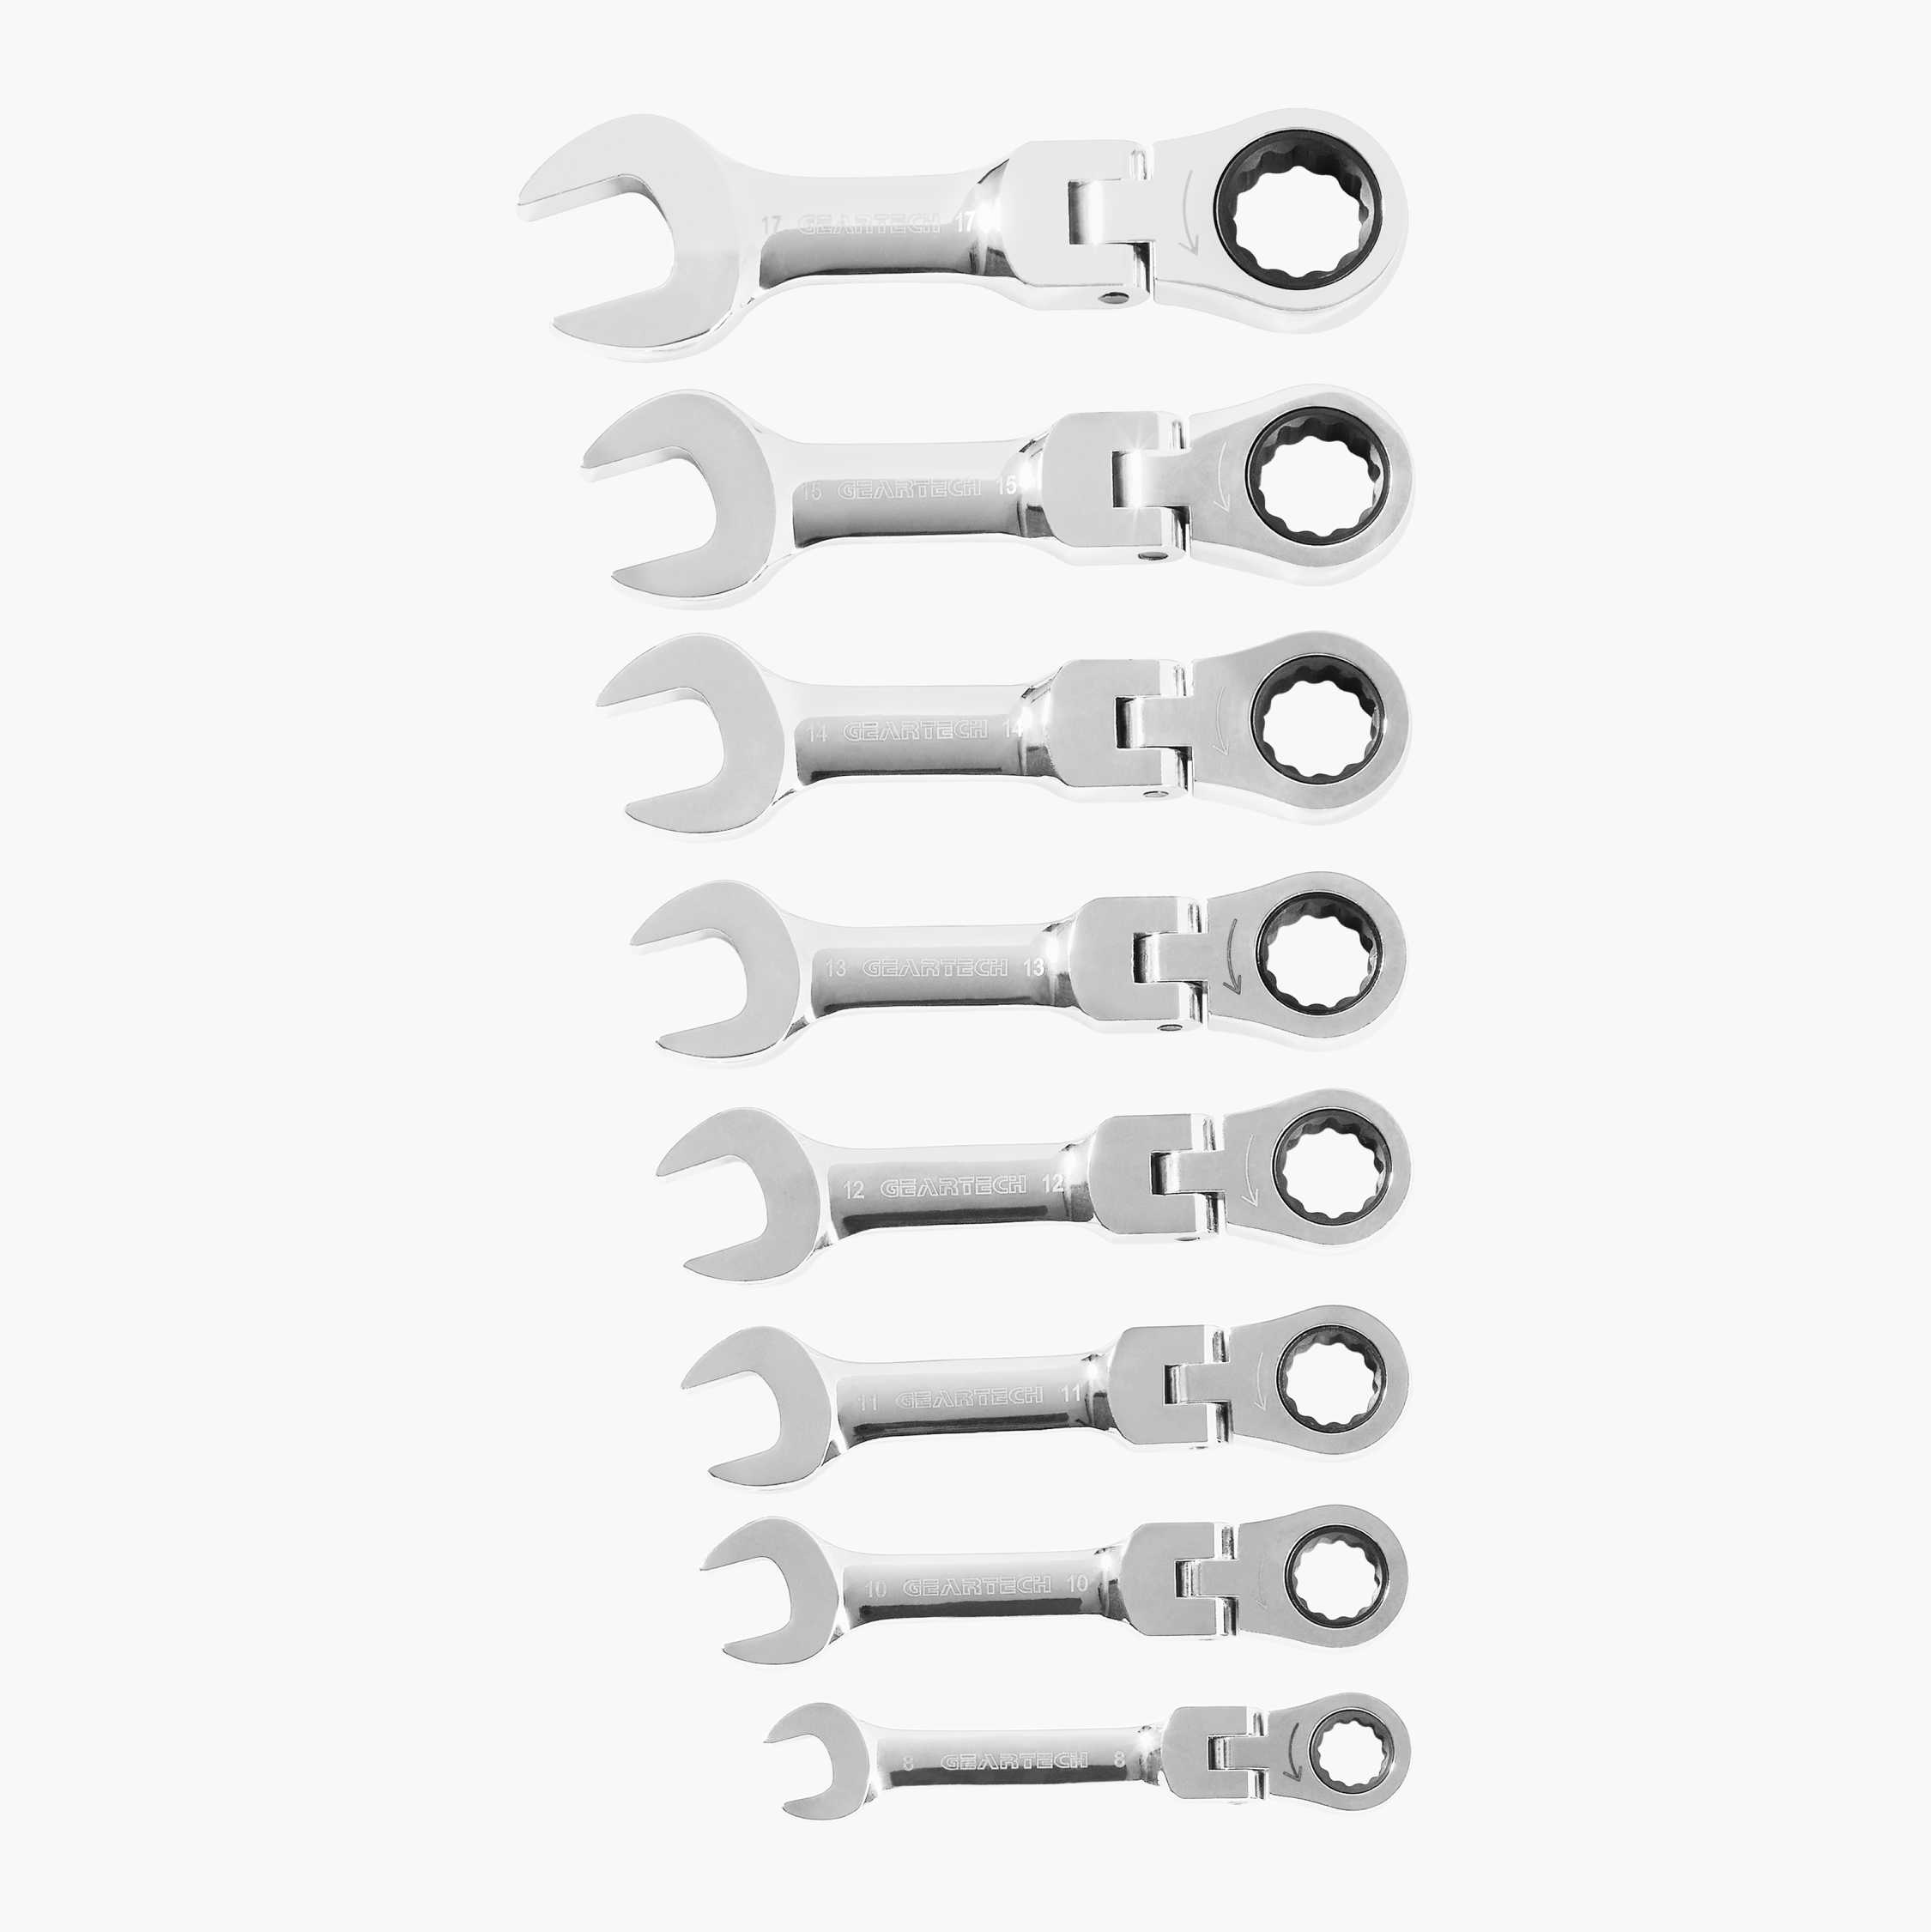 Am-tech Stubby Combination Wrench Set 10mm-19mm Short Ring Spanner Open Ended